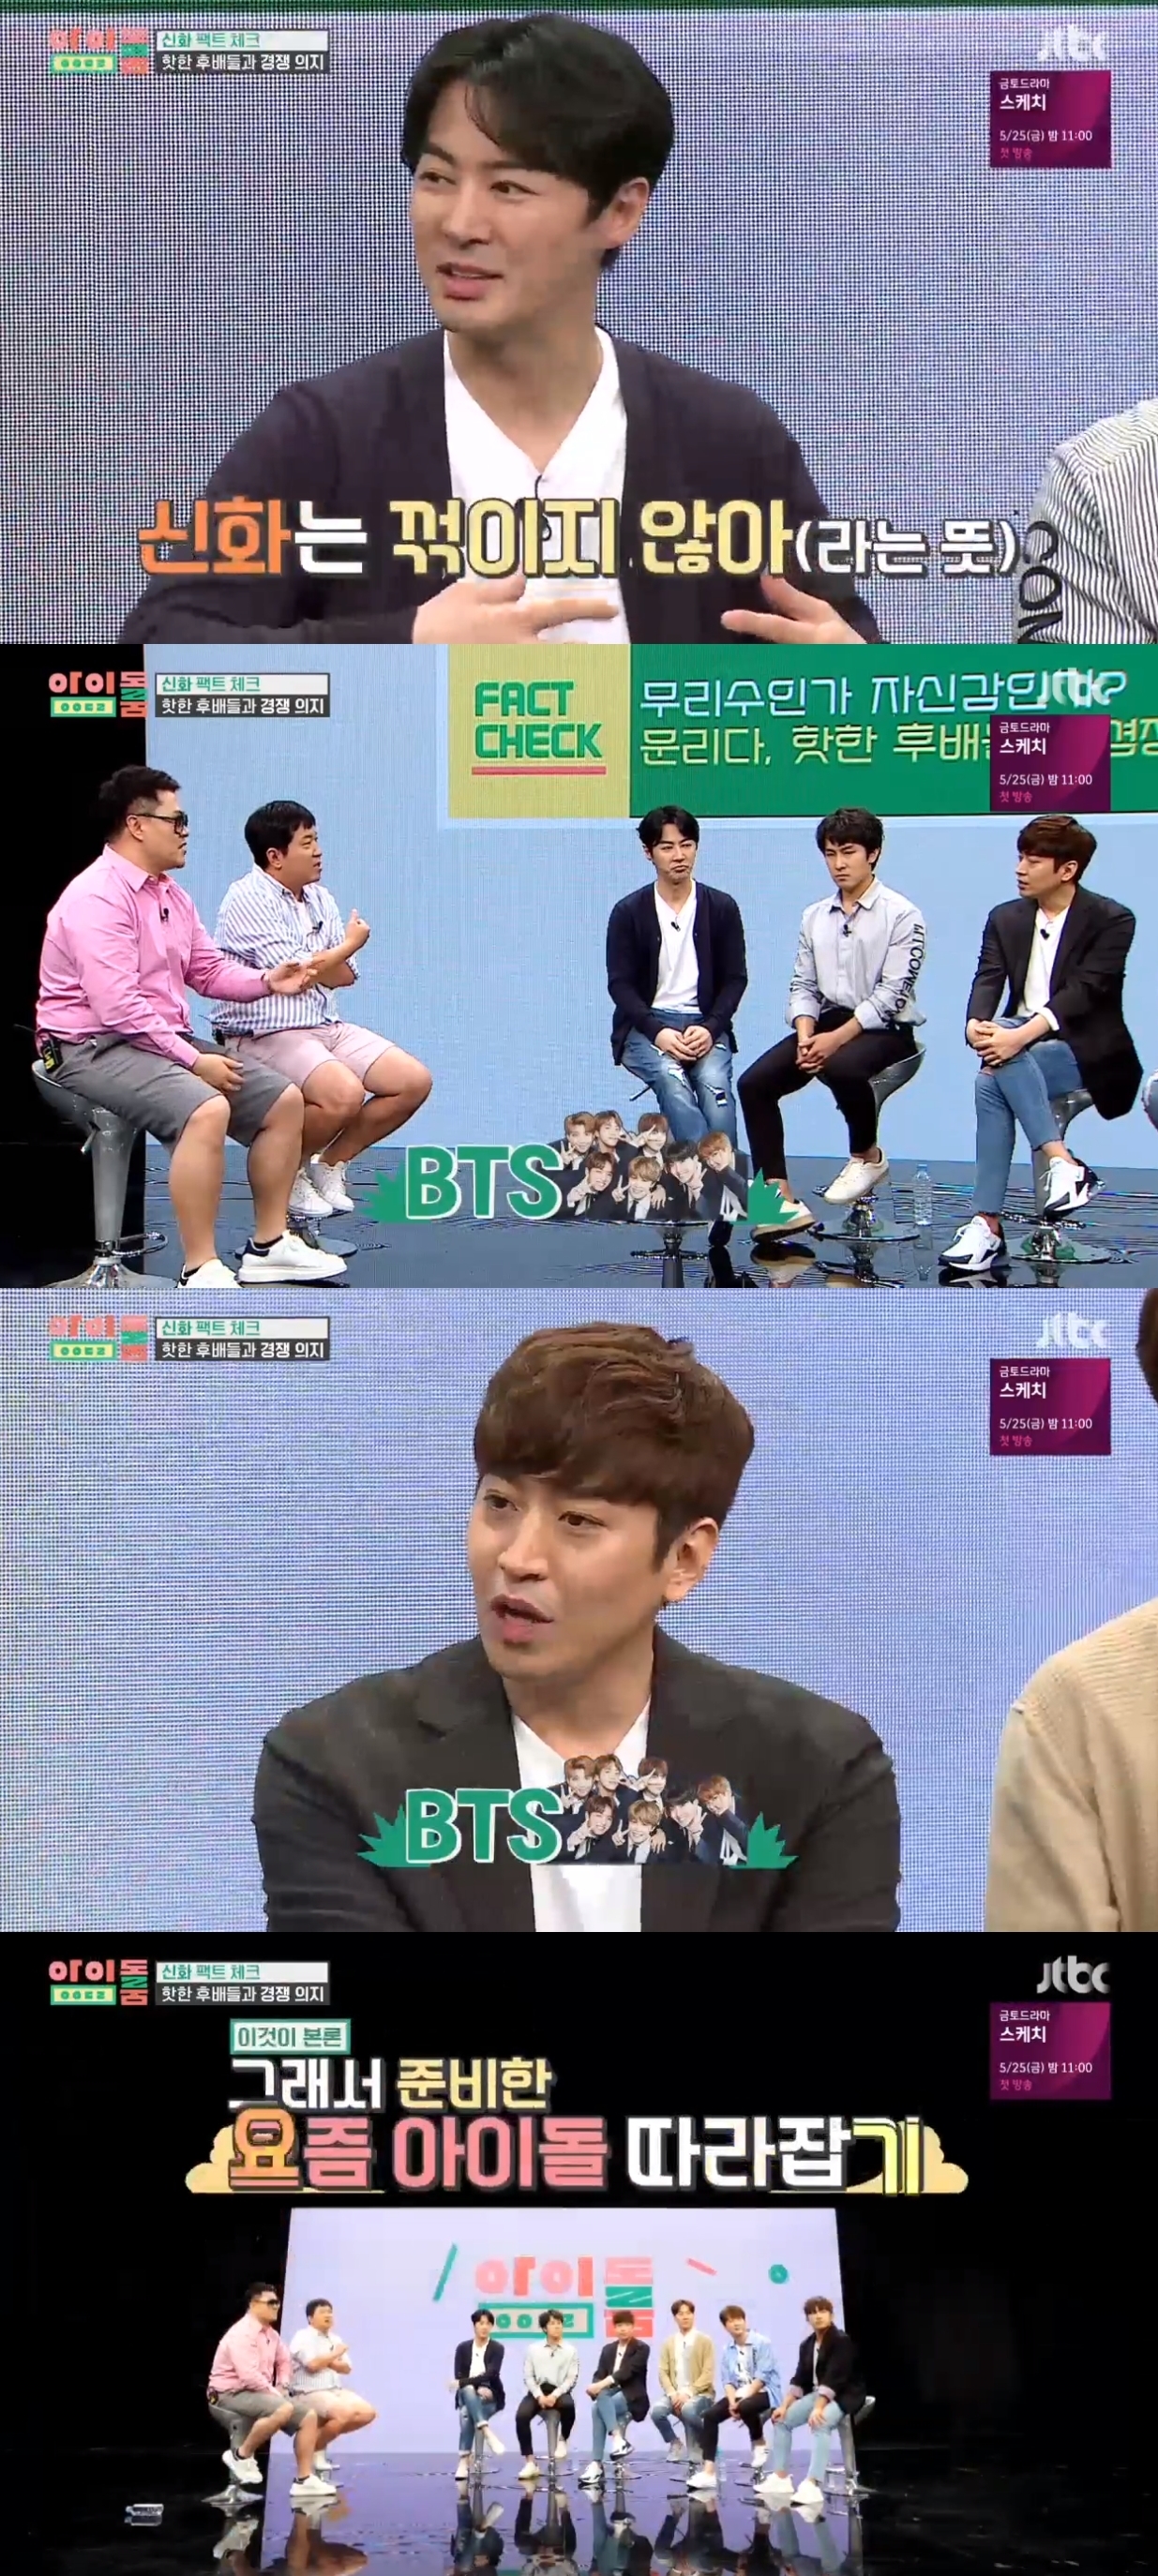 On JTBC Idol room broadcasted at 4:40 pm on the 19th, a myth appeared in Packt Check corner.For the Packt check, Minwoo showed off his own part gymnastics: You can lie down like this, then grab your fist and hit your tailbone, he explained.Defcon asked, How many times do you have to knock open? and Jeong Hyeong-don challenged the Fart gymnastics himself.Minwoo directly hit the Jeong Hyeong-don tail bone, and Jeong Hyeong-don said, I do not know what it is, but I am going to come out now.Eric Mun apologized for his past remarks and said, I think BTS is a proud junior because he is active in foreign countries on behalf of Korea these days.